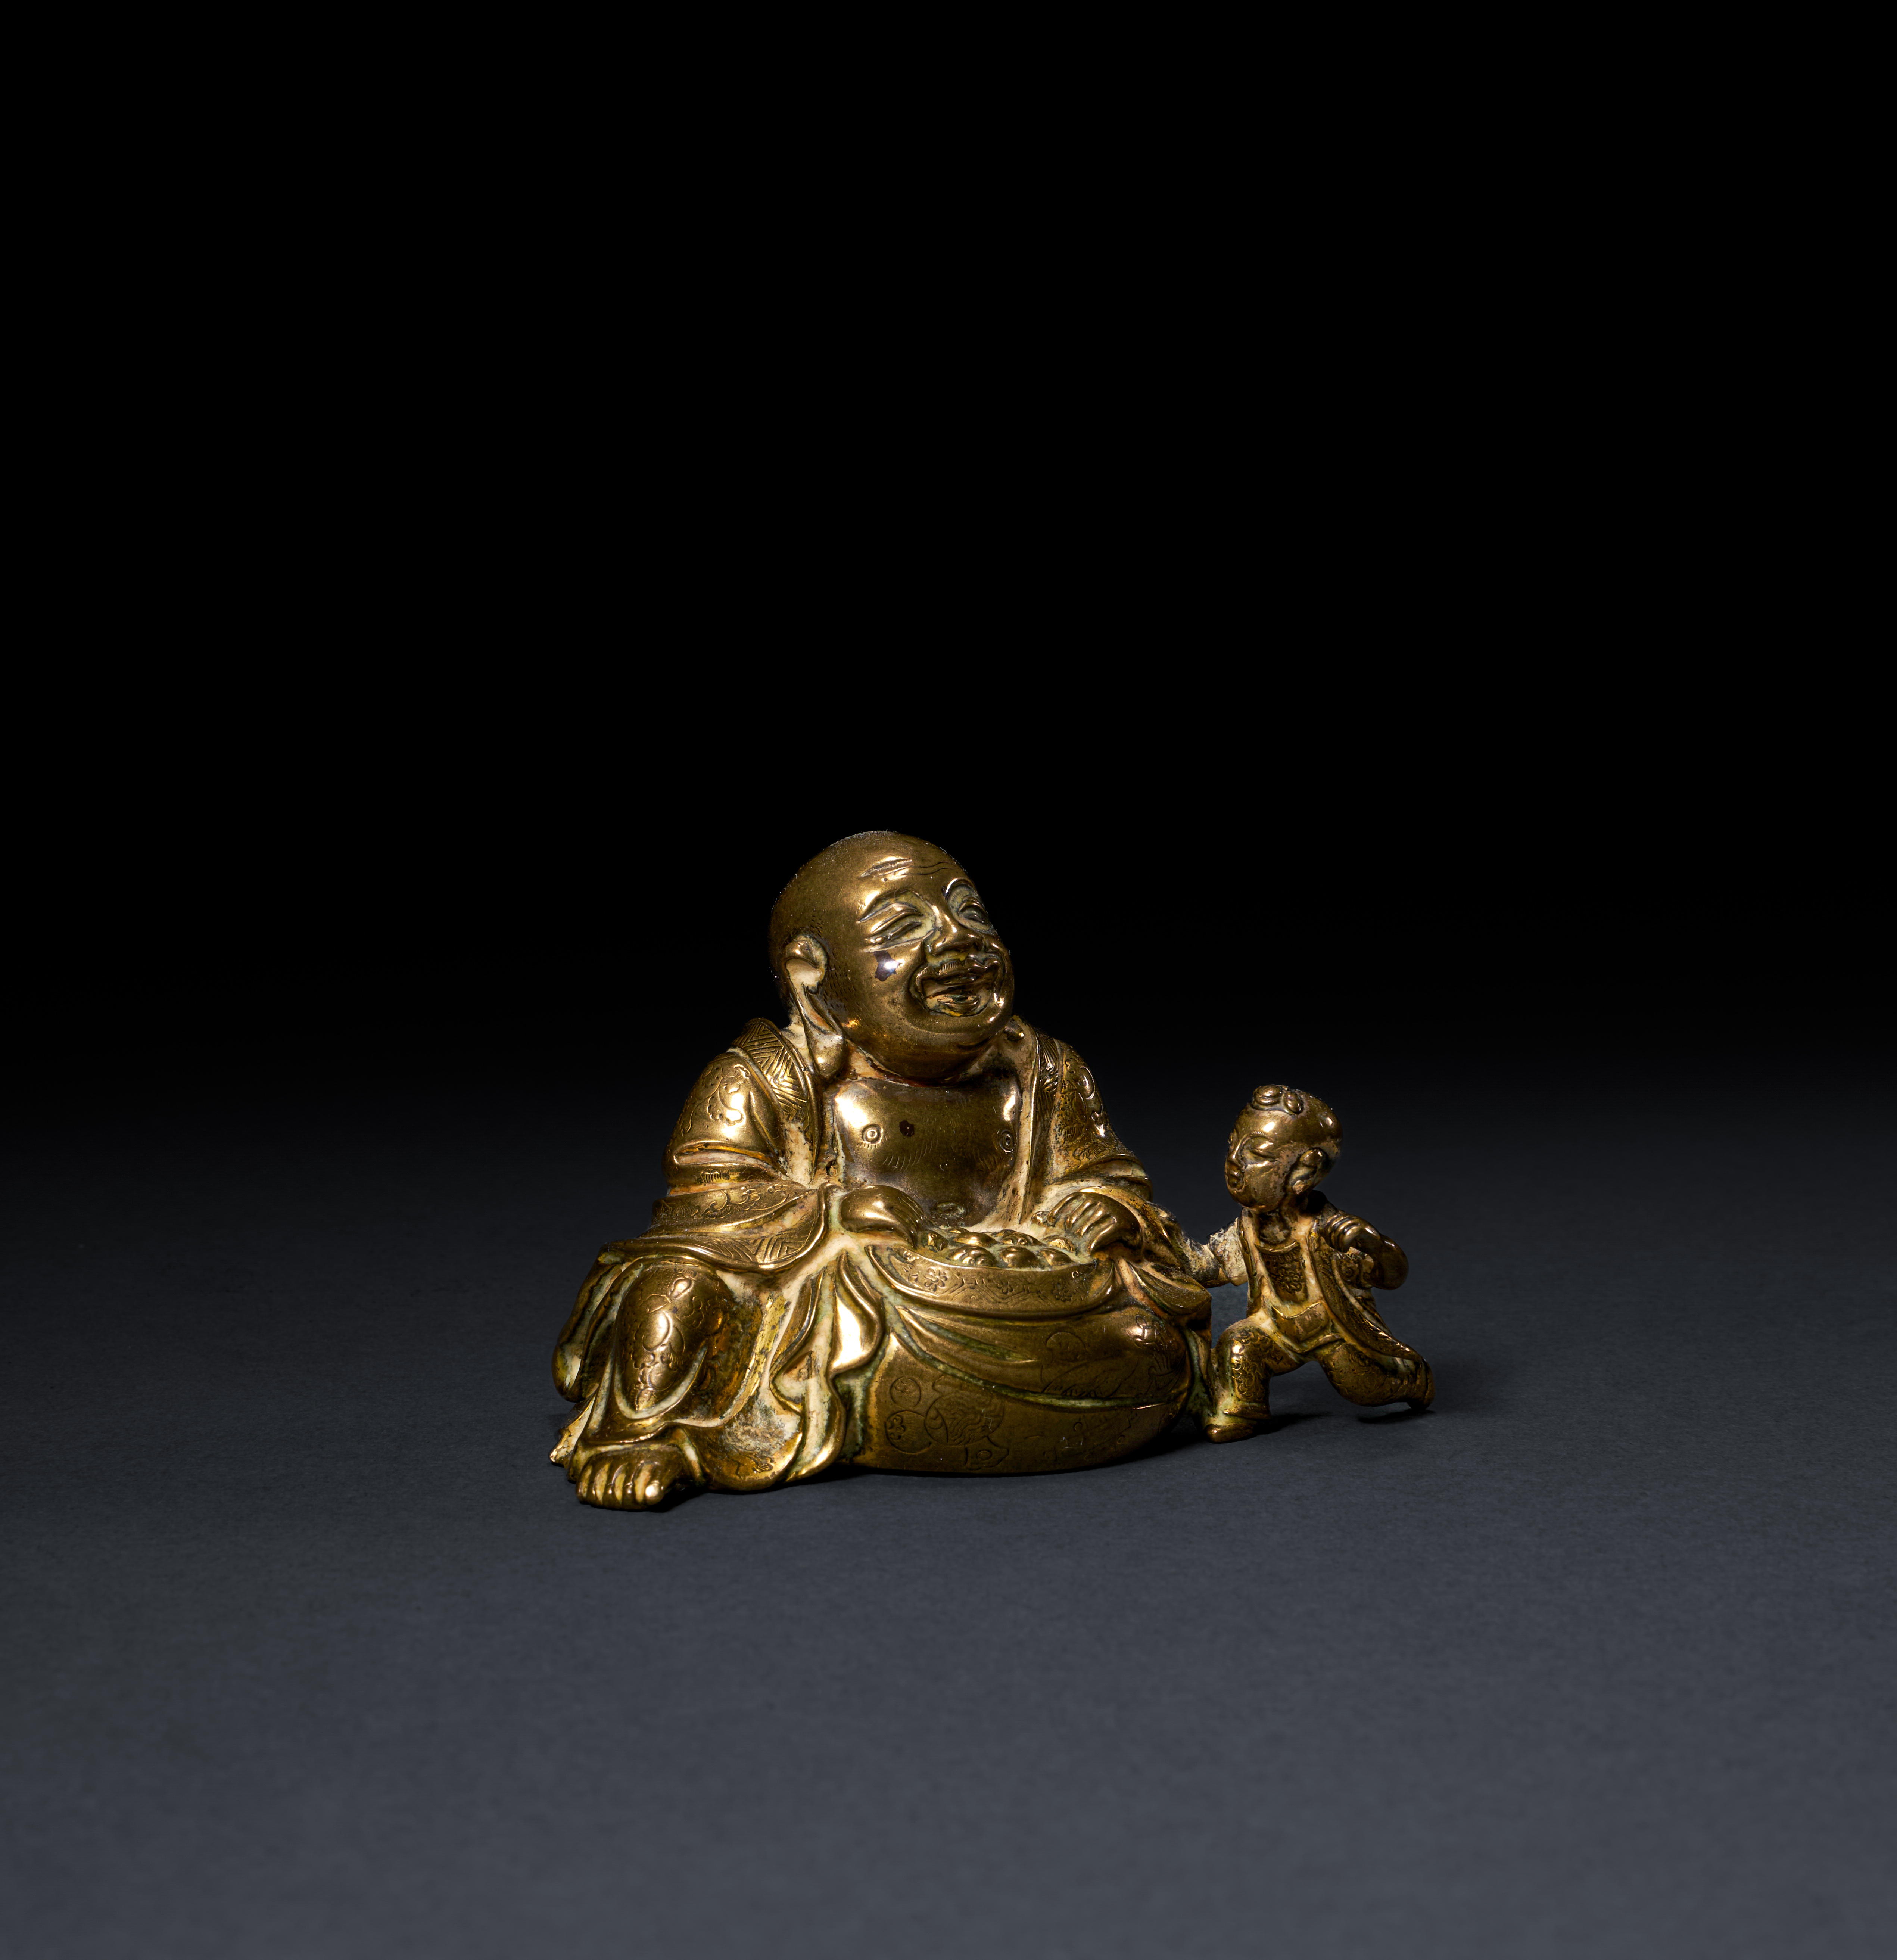 A CHINESE GILT BRONZE FIGURE OF A HOTEI & BOY, QING DYNASTY (1644-1911) - Image 2 of 4